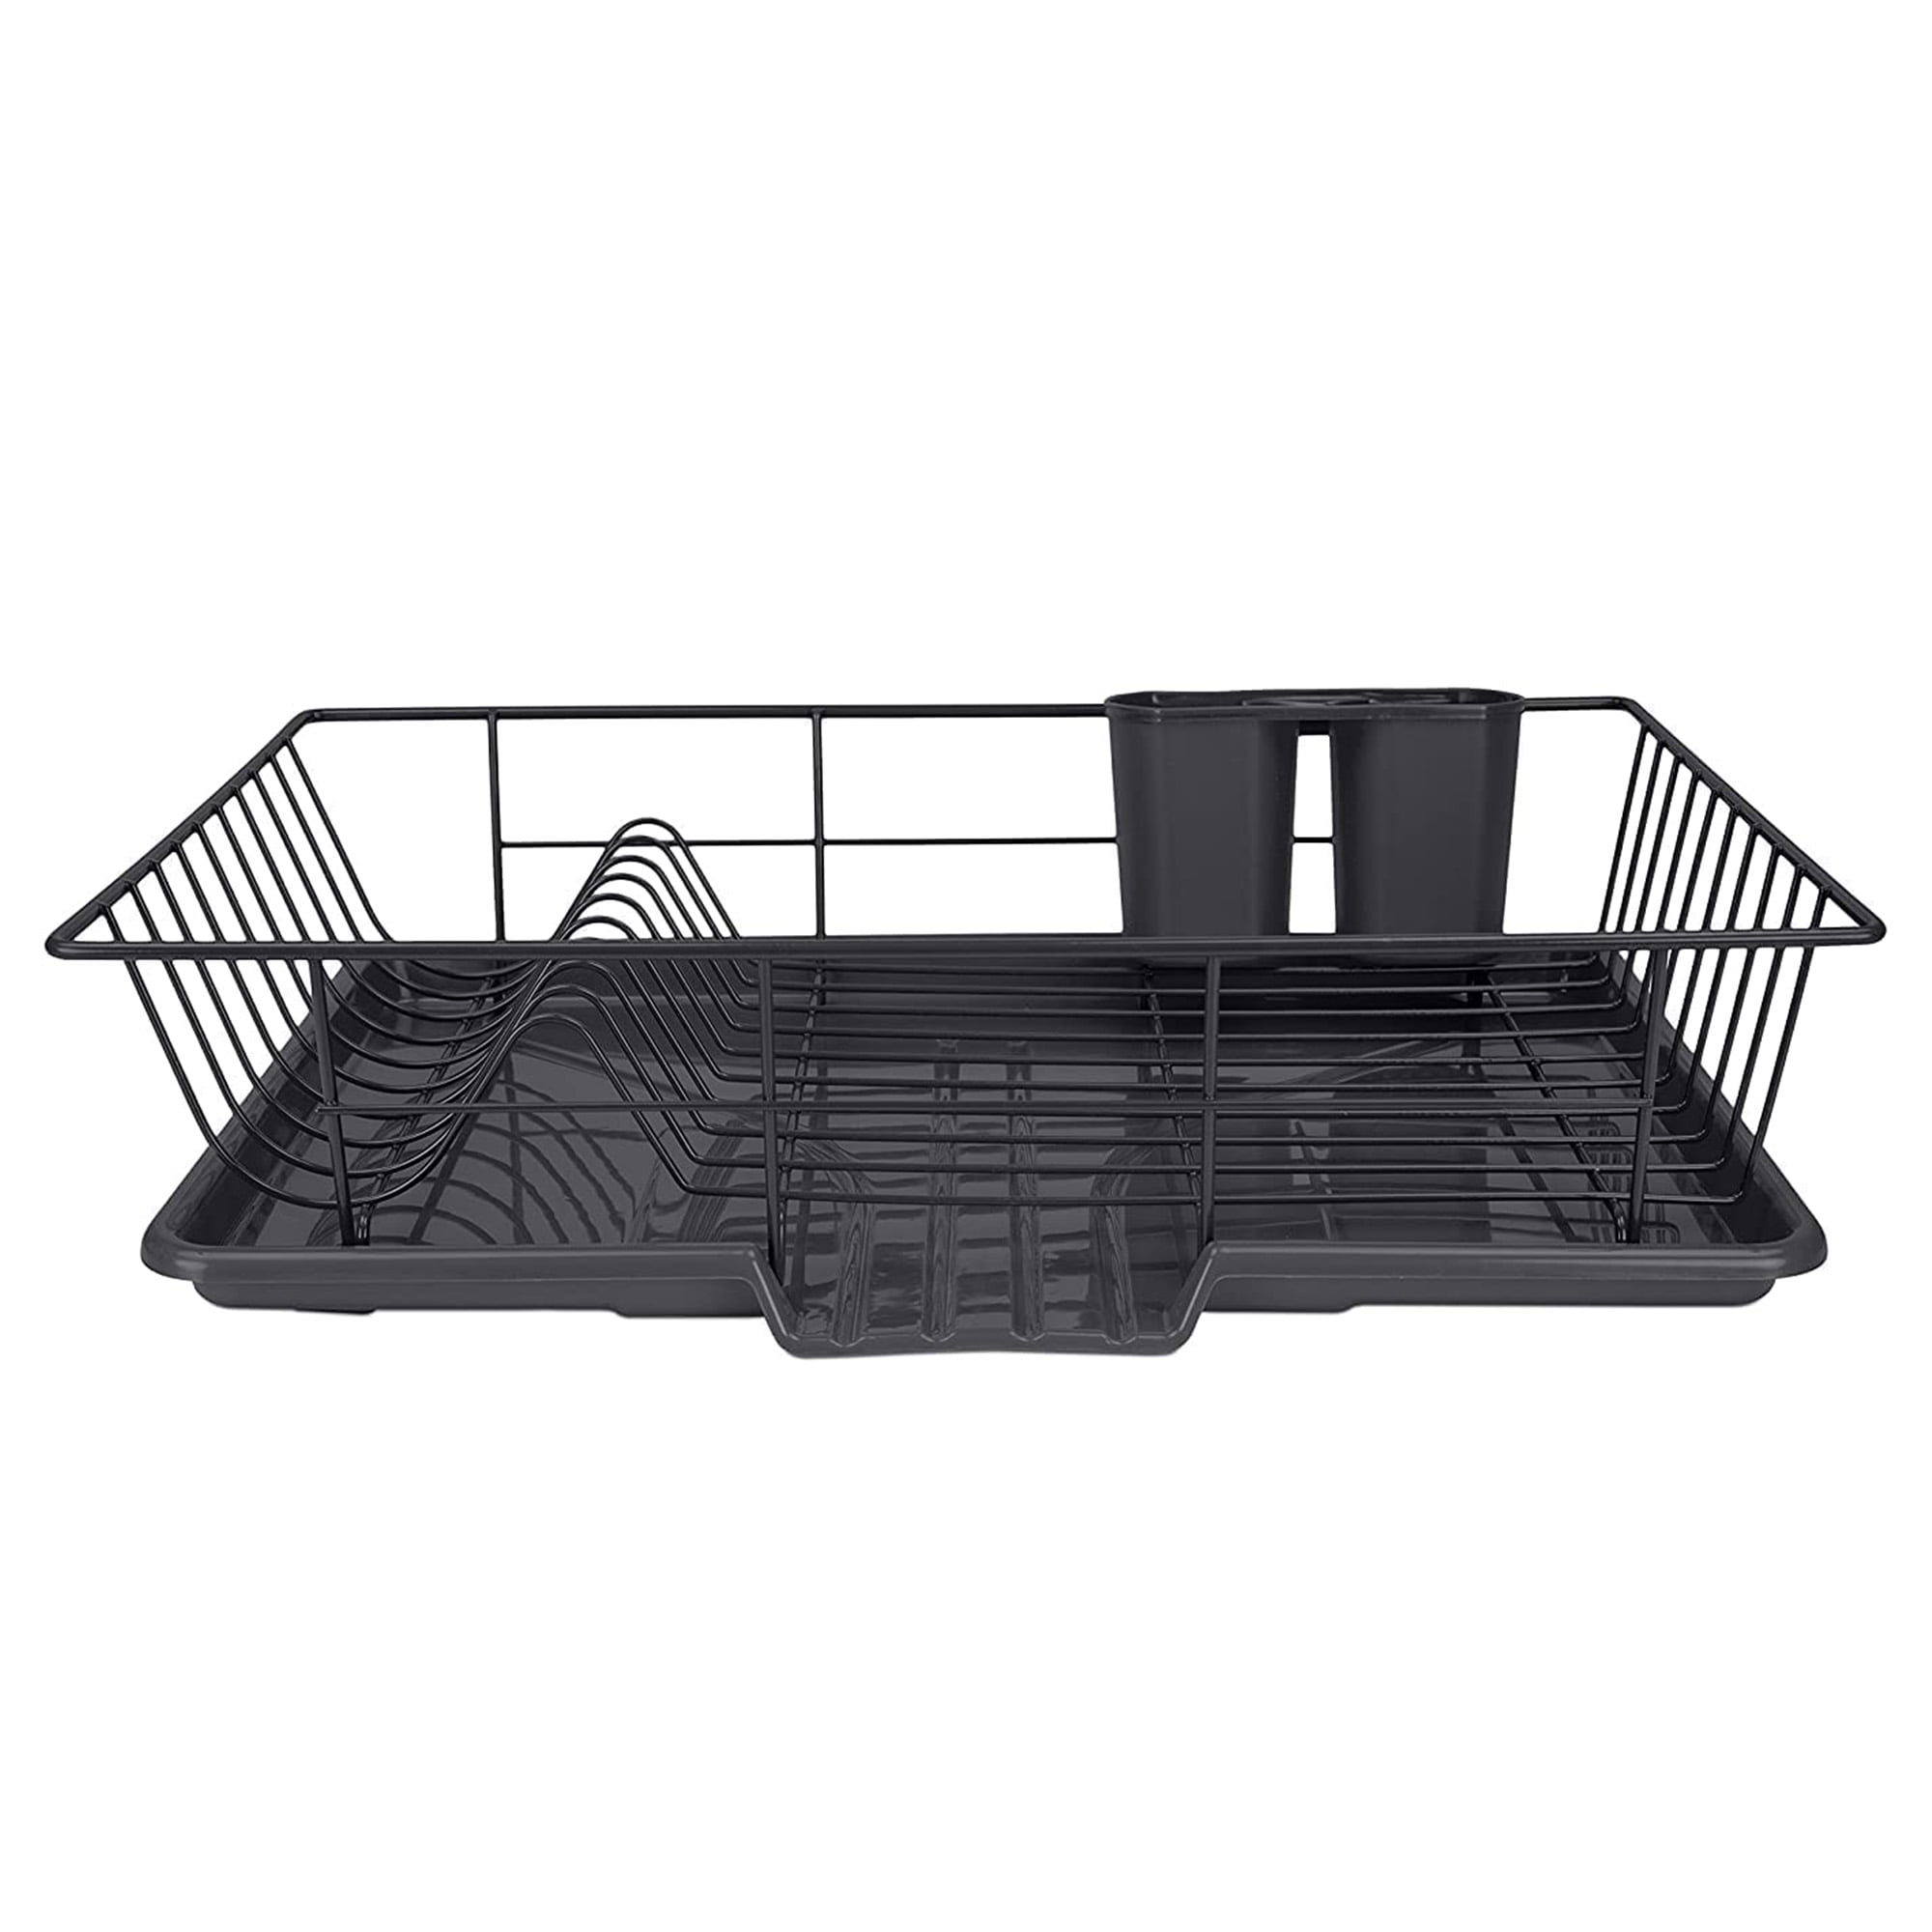 Virgorack 3 Tier Large Wall Mounted Dish Drainer, Stainless Steel Dish  Rack, Dish Drying Rack for Kitchen with Utensil Organizer (Black)